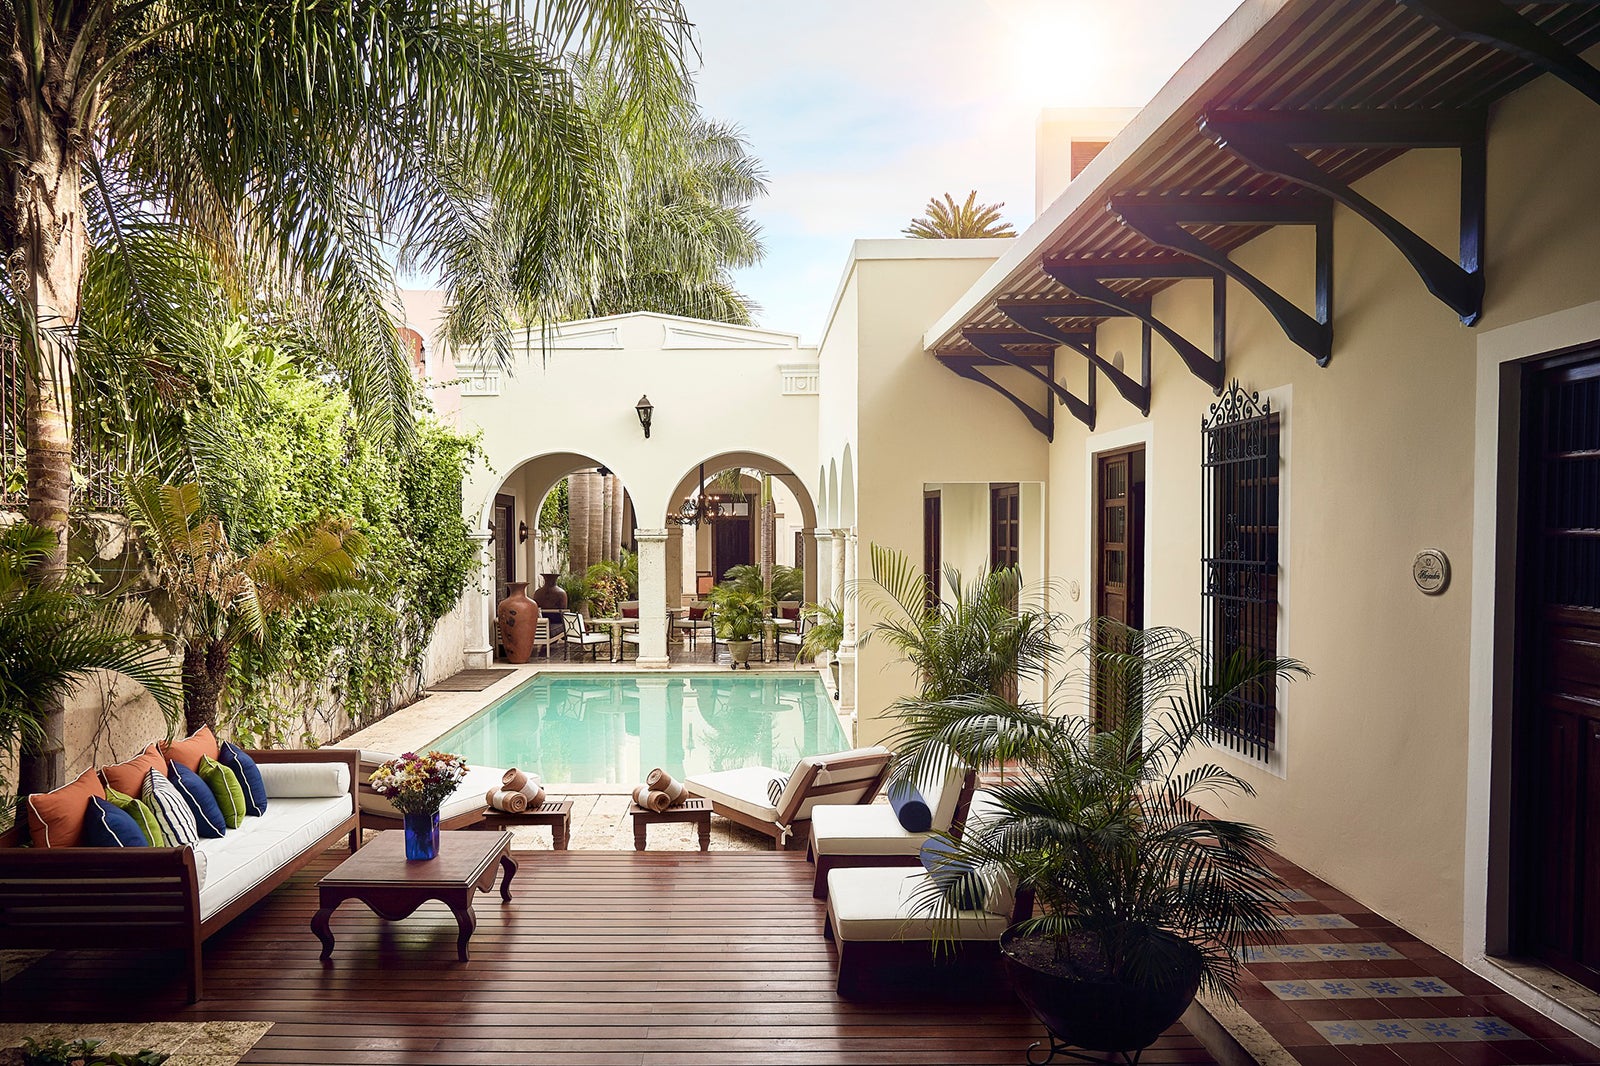 courtyard with a pool in a tropical location 